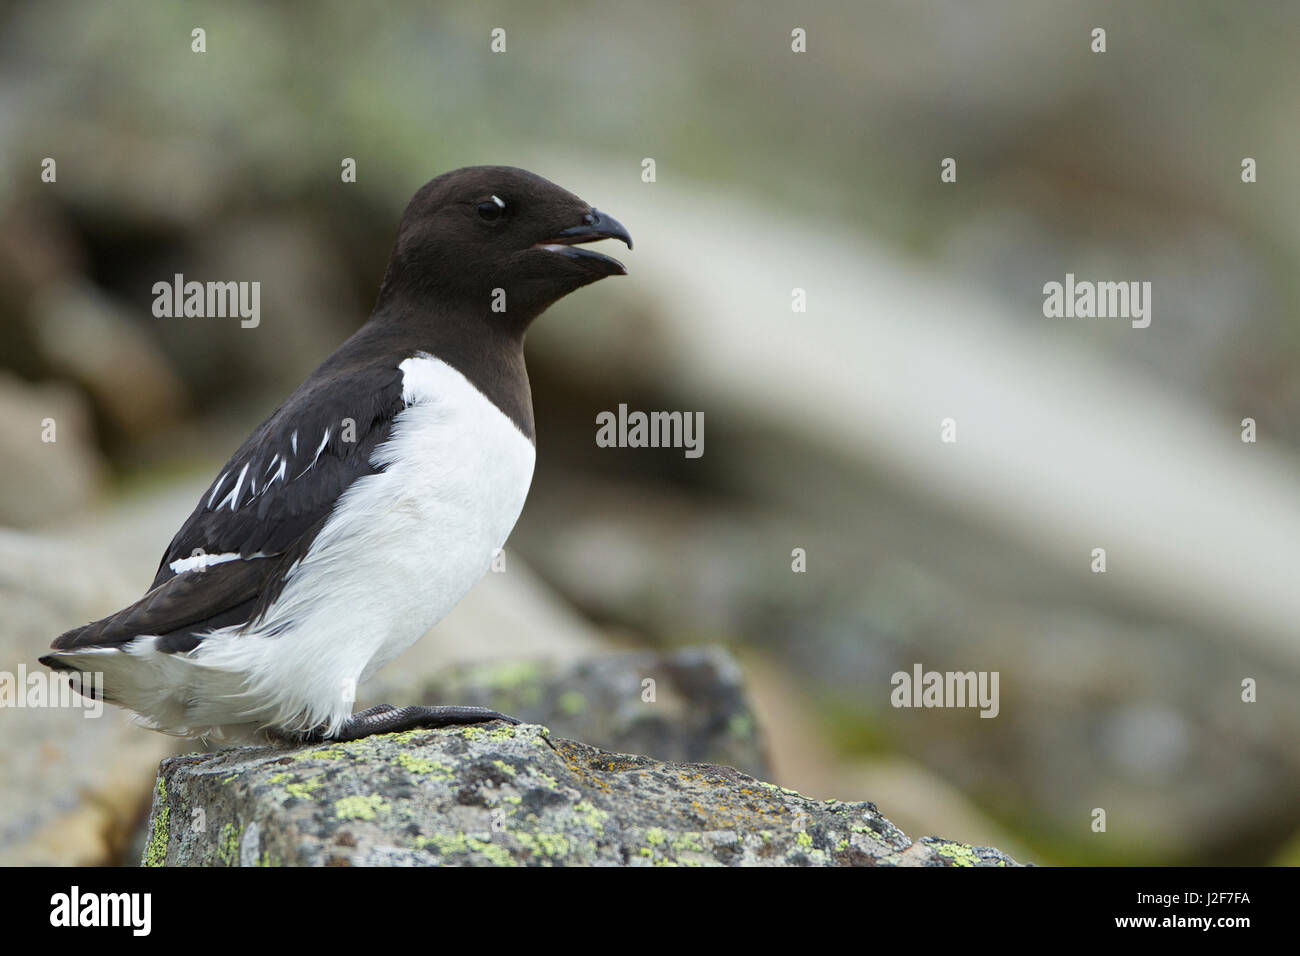 A Little Auk on a rock in the colony Stock Photo